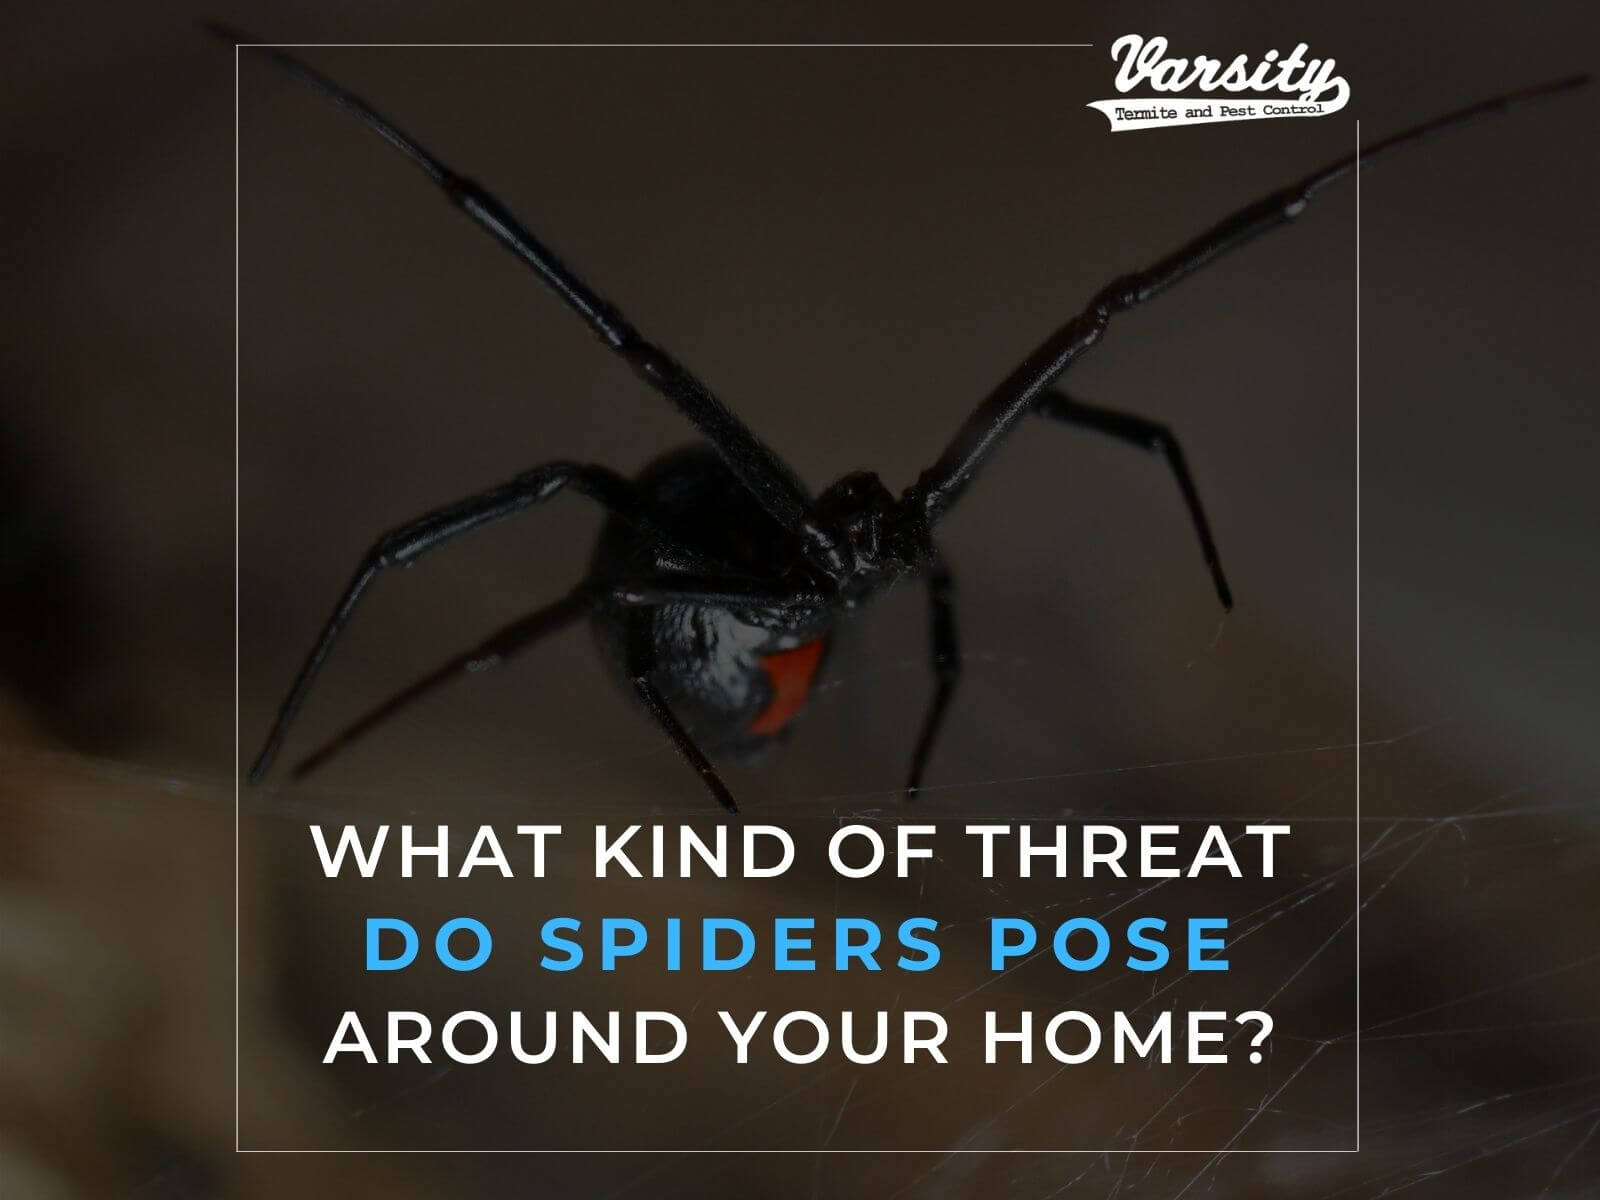 What Kind of Threat Do Spiders Pose around Your Home?